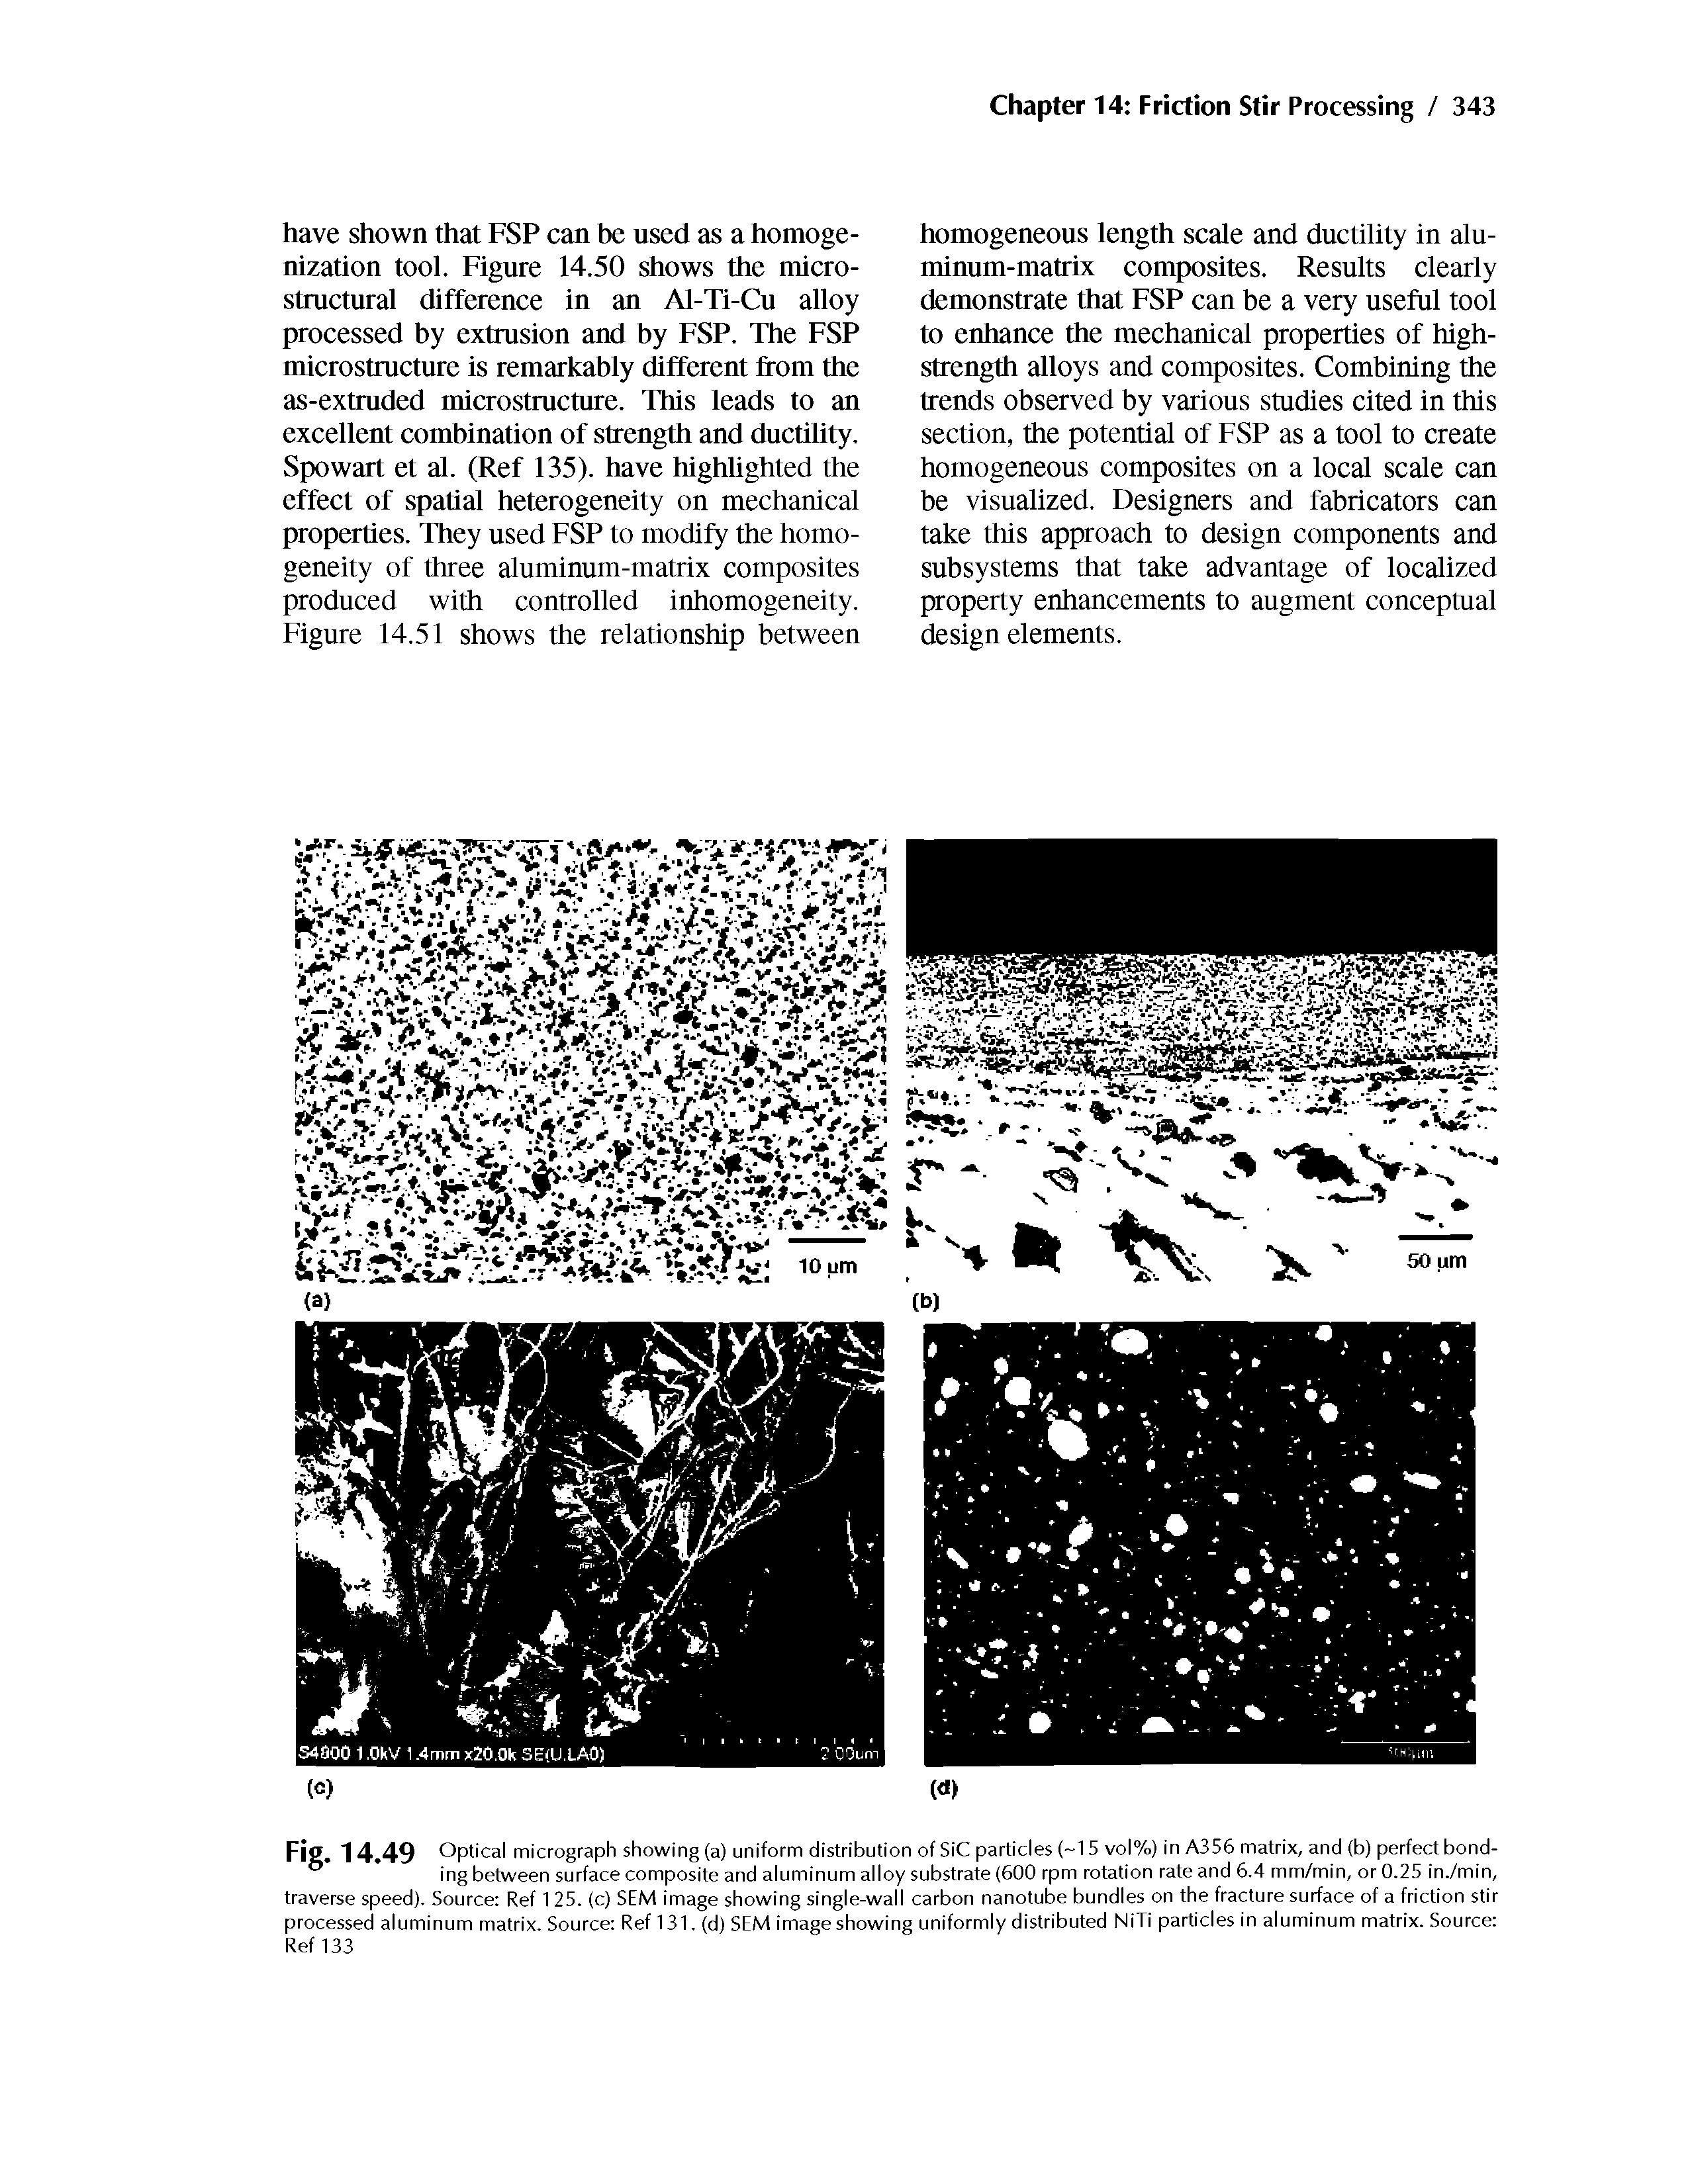 Fig. 1 4.49 Optical micrograph showing (a) uniform distribution of SiC particles ( 15 vol%) in A356 matrix, and (b) perfect bonding between surface composite and aluminum alloy substrate (500 rpm rotation rate and 6.4 mm/min, or 0.25 in./min, traverse speed). Source Ref 1 25. (c) SEM image showing single-wall carbon nanotube bundles on the fracture surface of a friction stir processed aluminum matrix. Source Ref 131. (d) SEM image showing uniformly distributed NiTi particles in aluminum matrix. Source Ref 133...